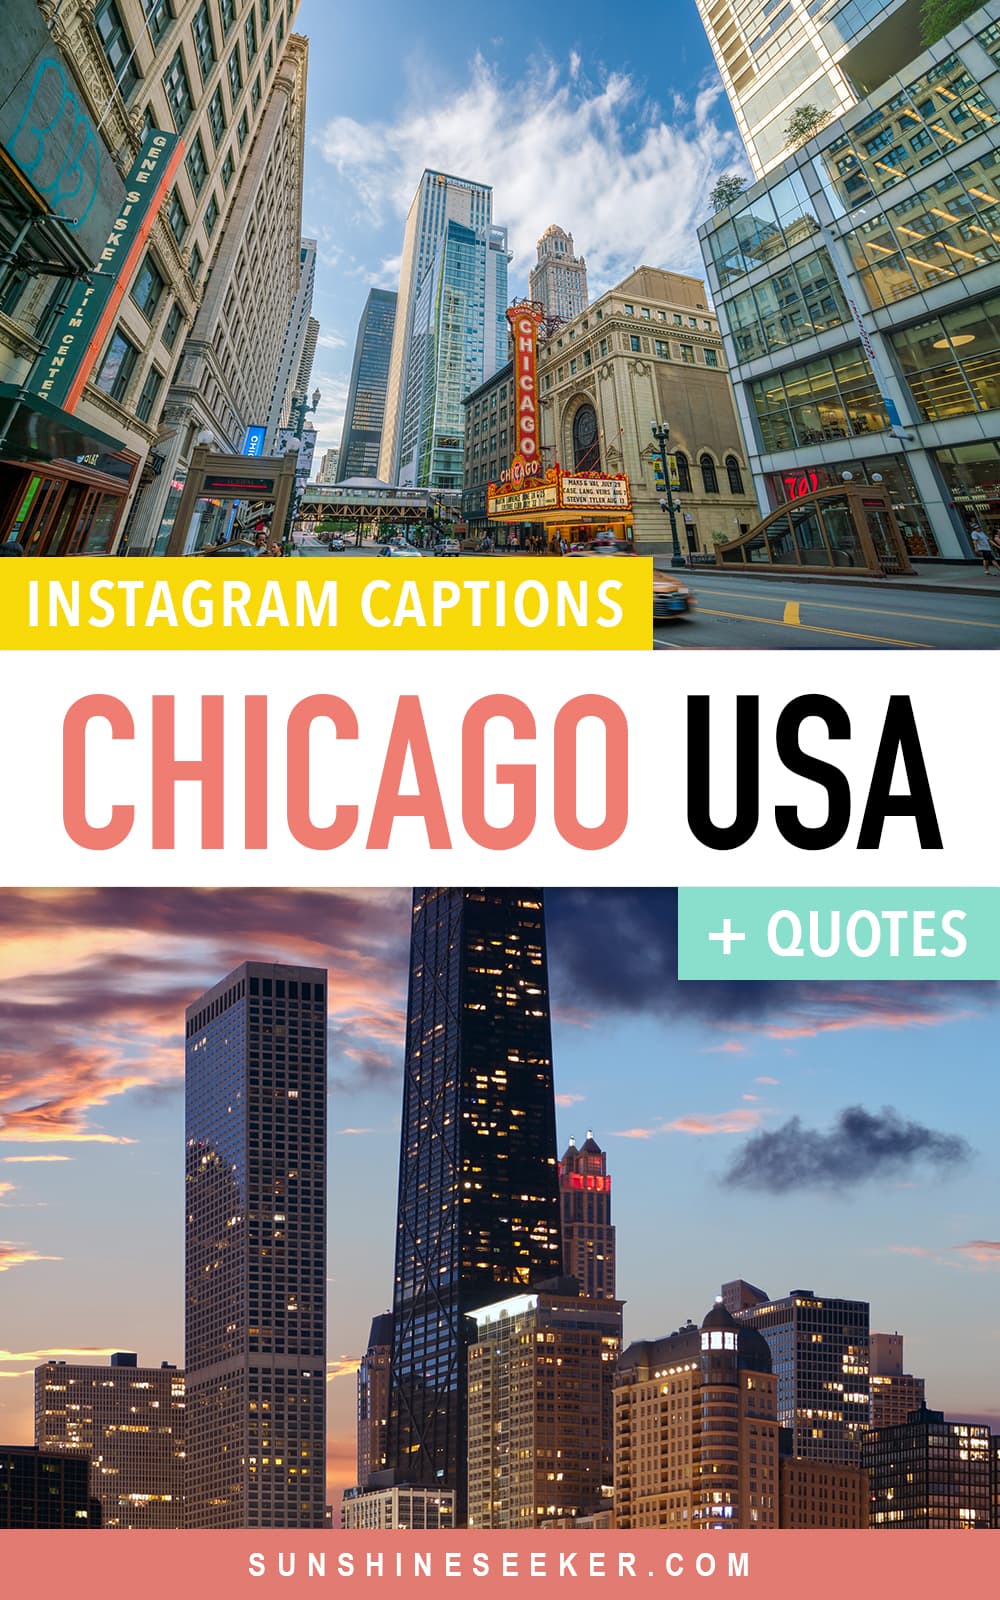 110+ Chicago Instagram captions to spice up your next social media post. Here you'll find "ready to post" Chicago Instagram captions, funny Chicago Instagram captions and quotes about Chicago by famous people.